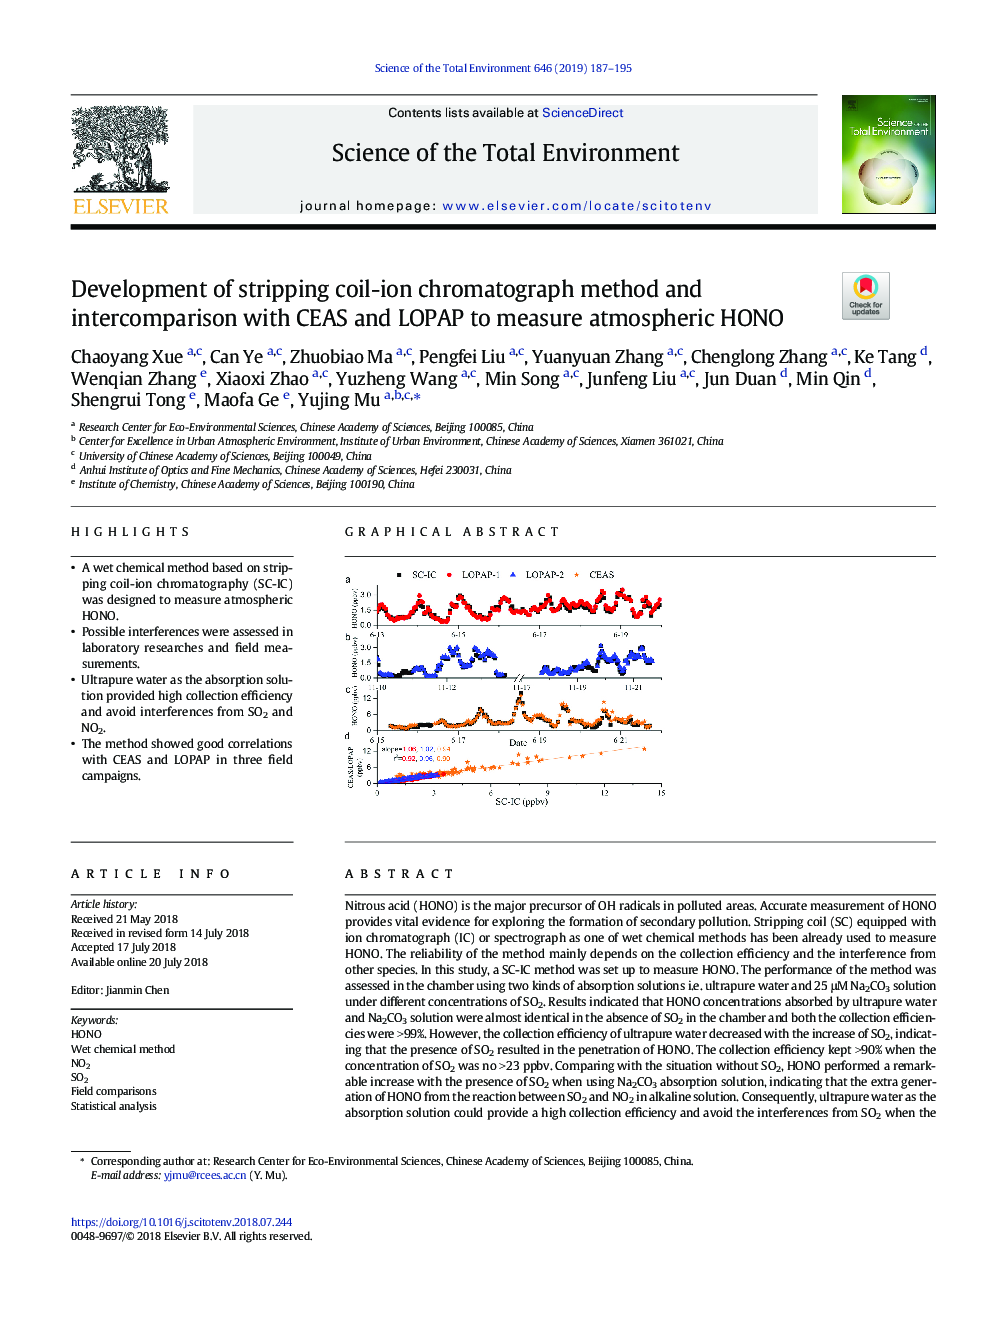 Development of stripping coil-ion chromatograph method and intercomparison with CEAS and LOPAP to measure atmospheric HONO